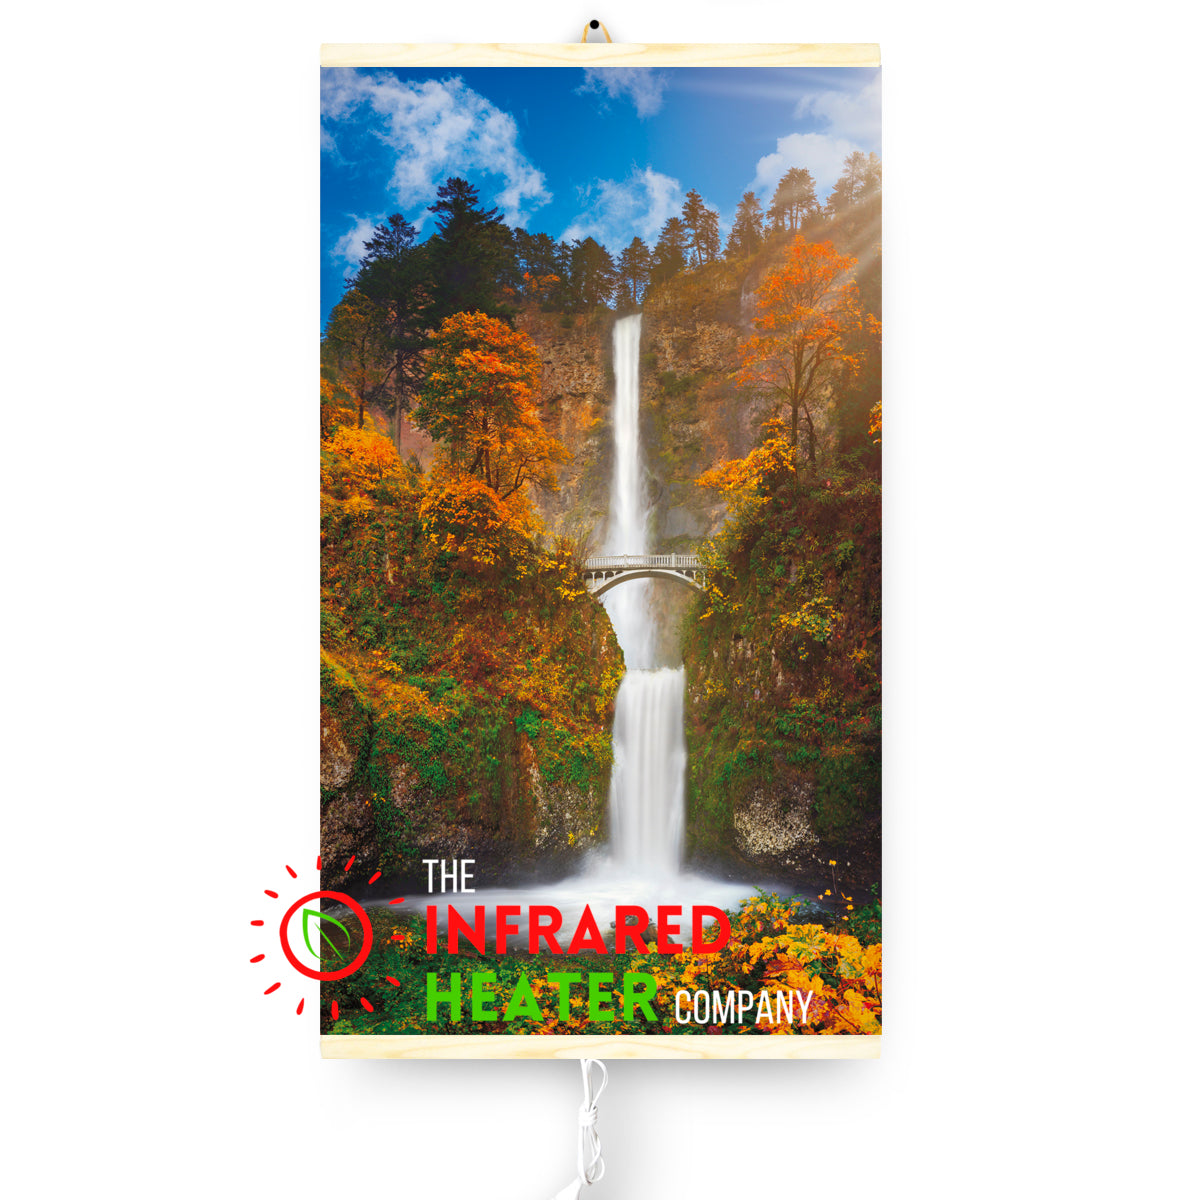 Infrared Wall mounted  Picture Heater. Far Infrared Heating Panel 420W "Waterfall and Bridge"